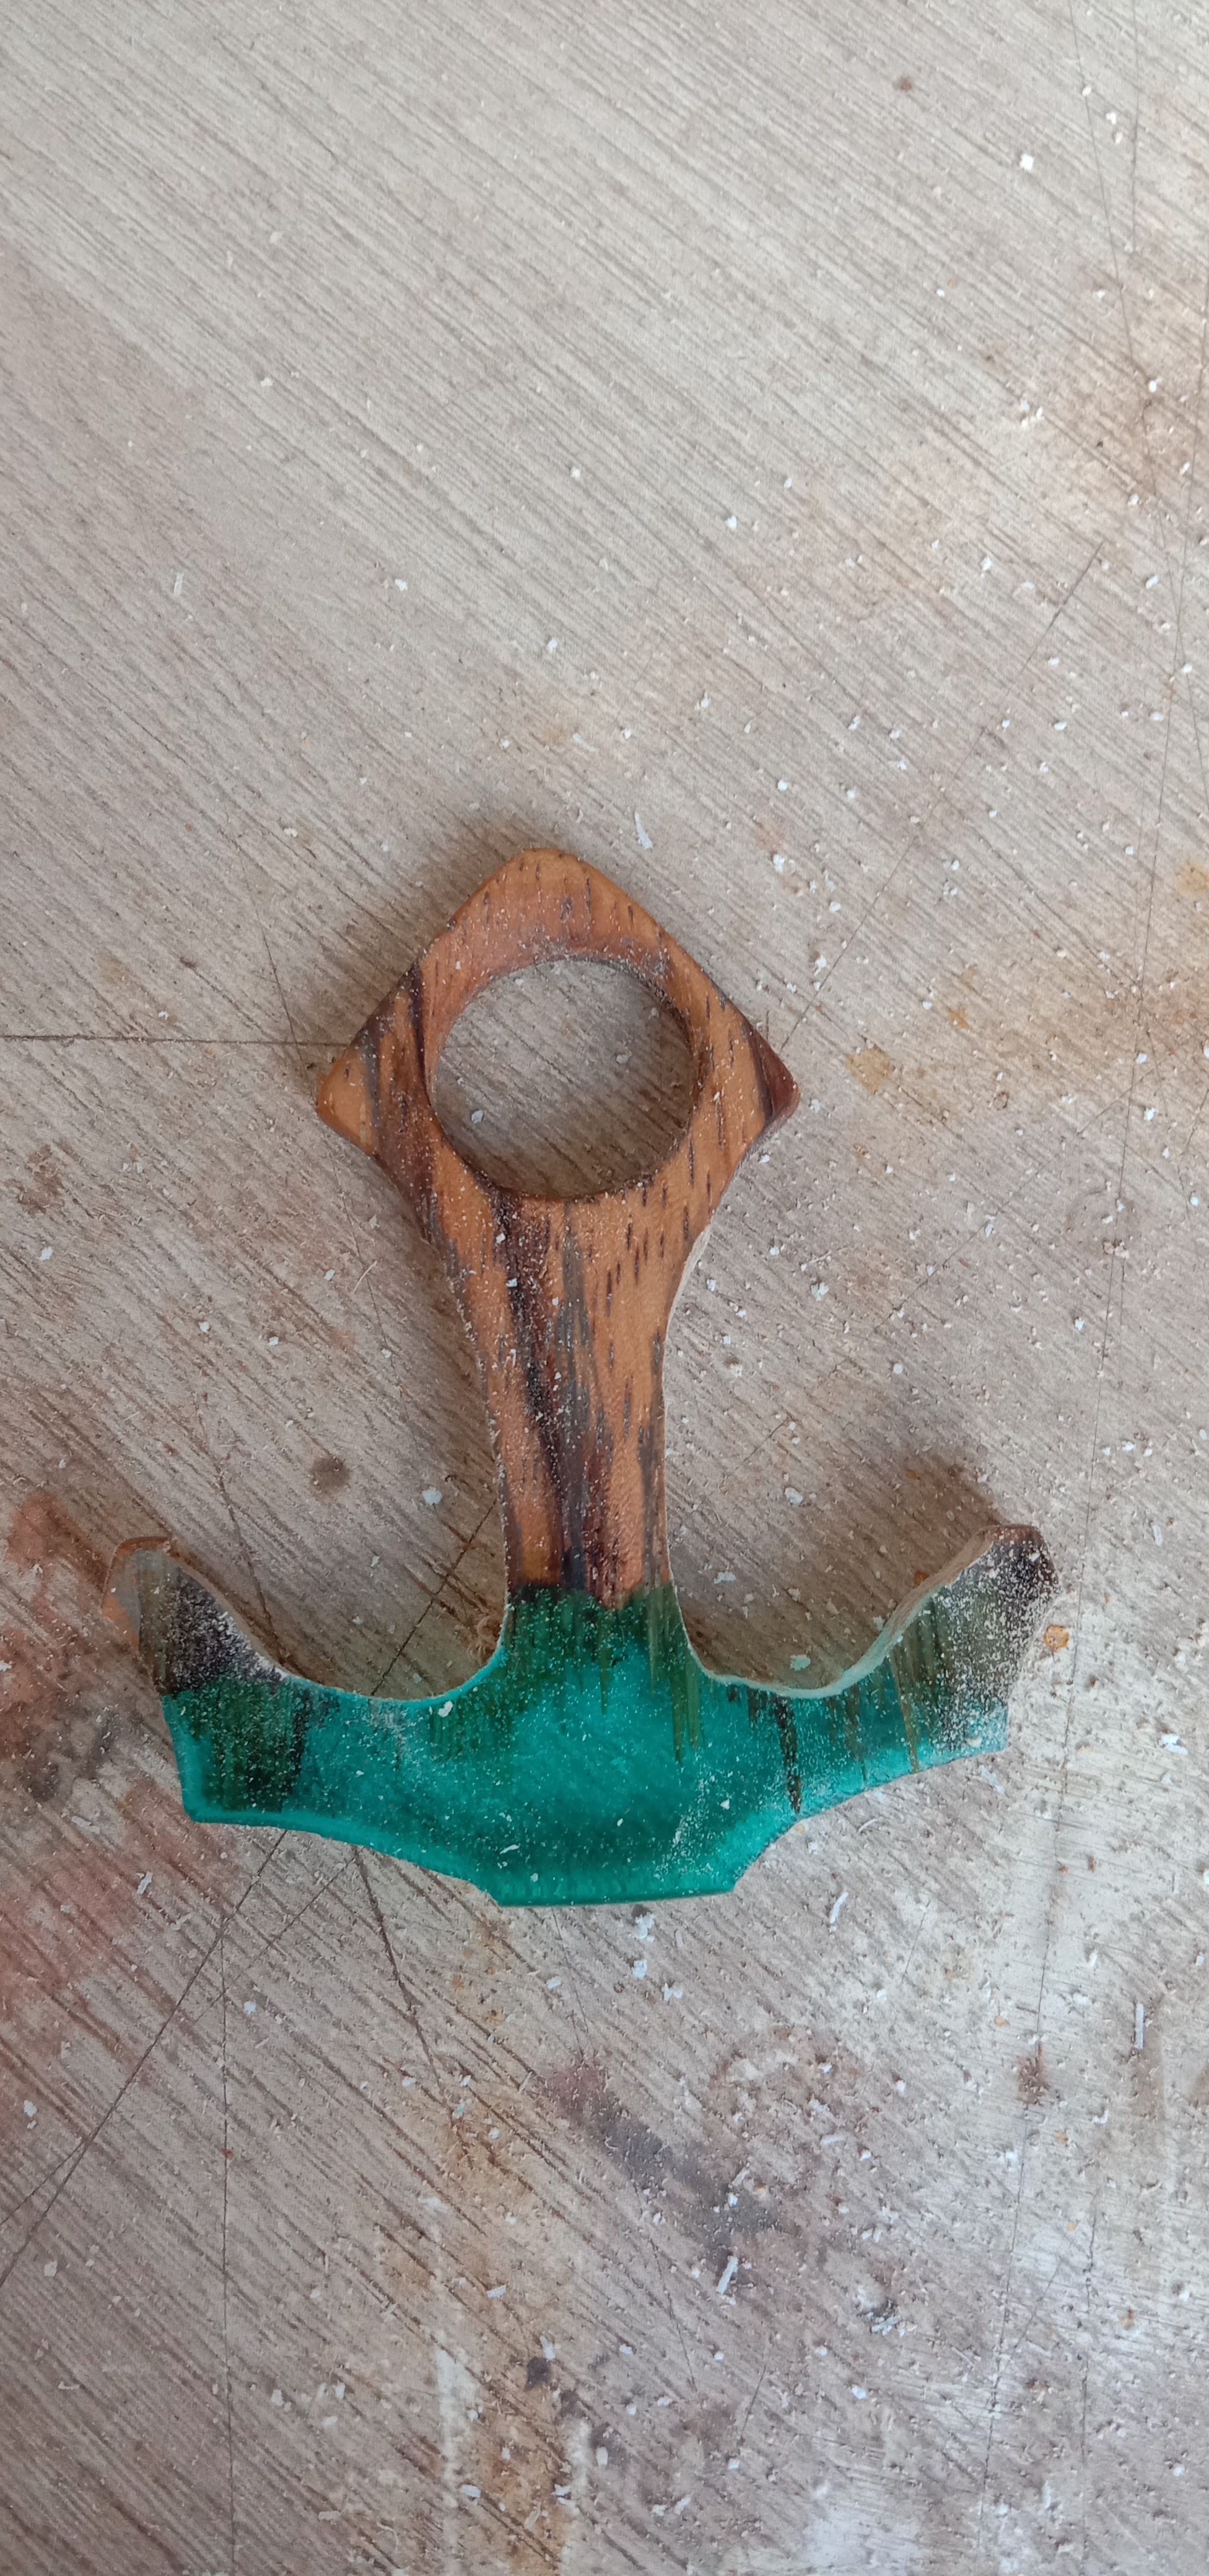 Epoxy and wood anchor - My, Handmade, With your own hands, Woodworking, Longpost, Needlework with process